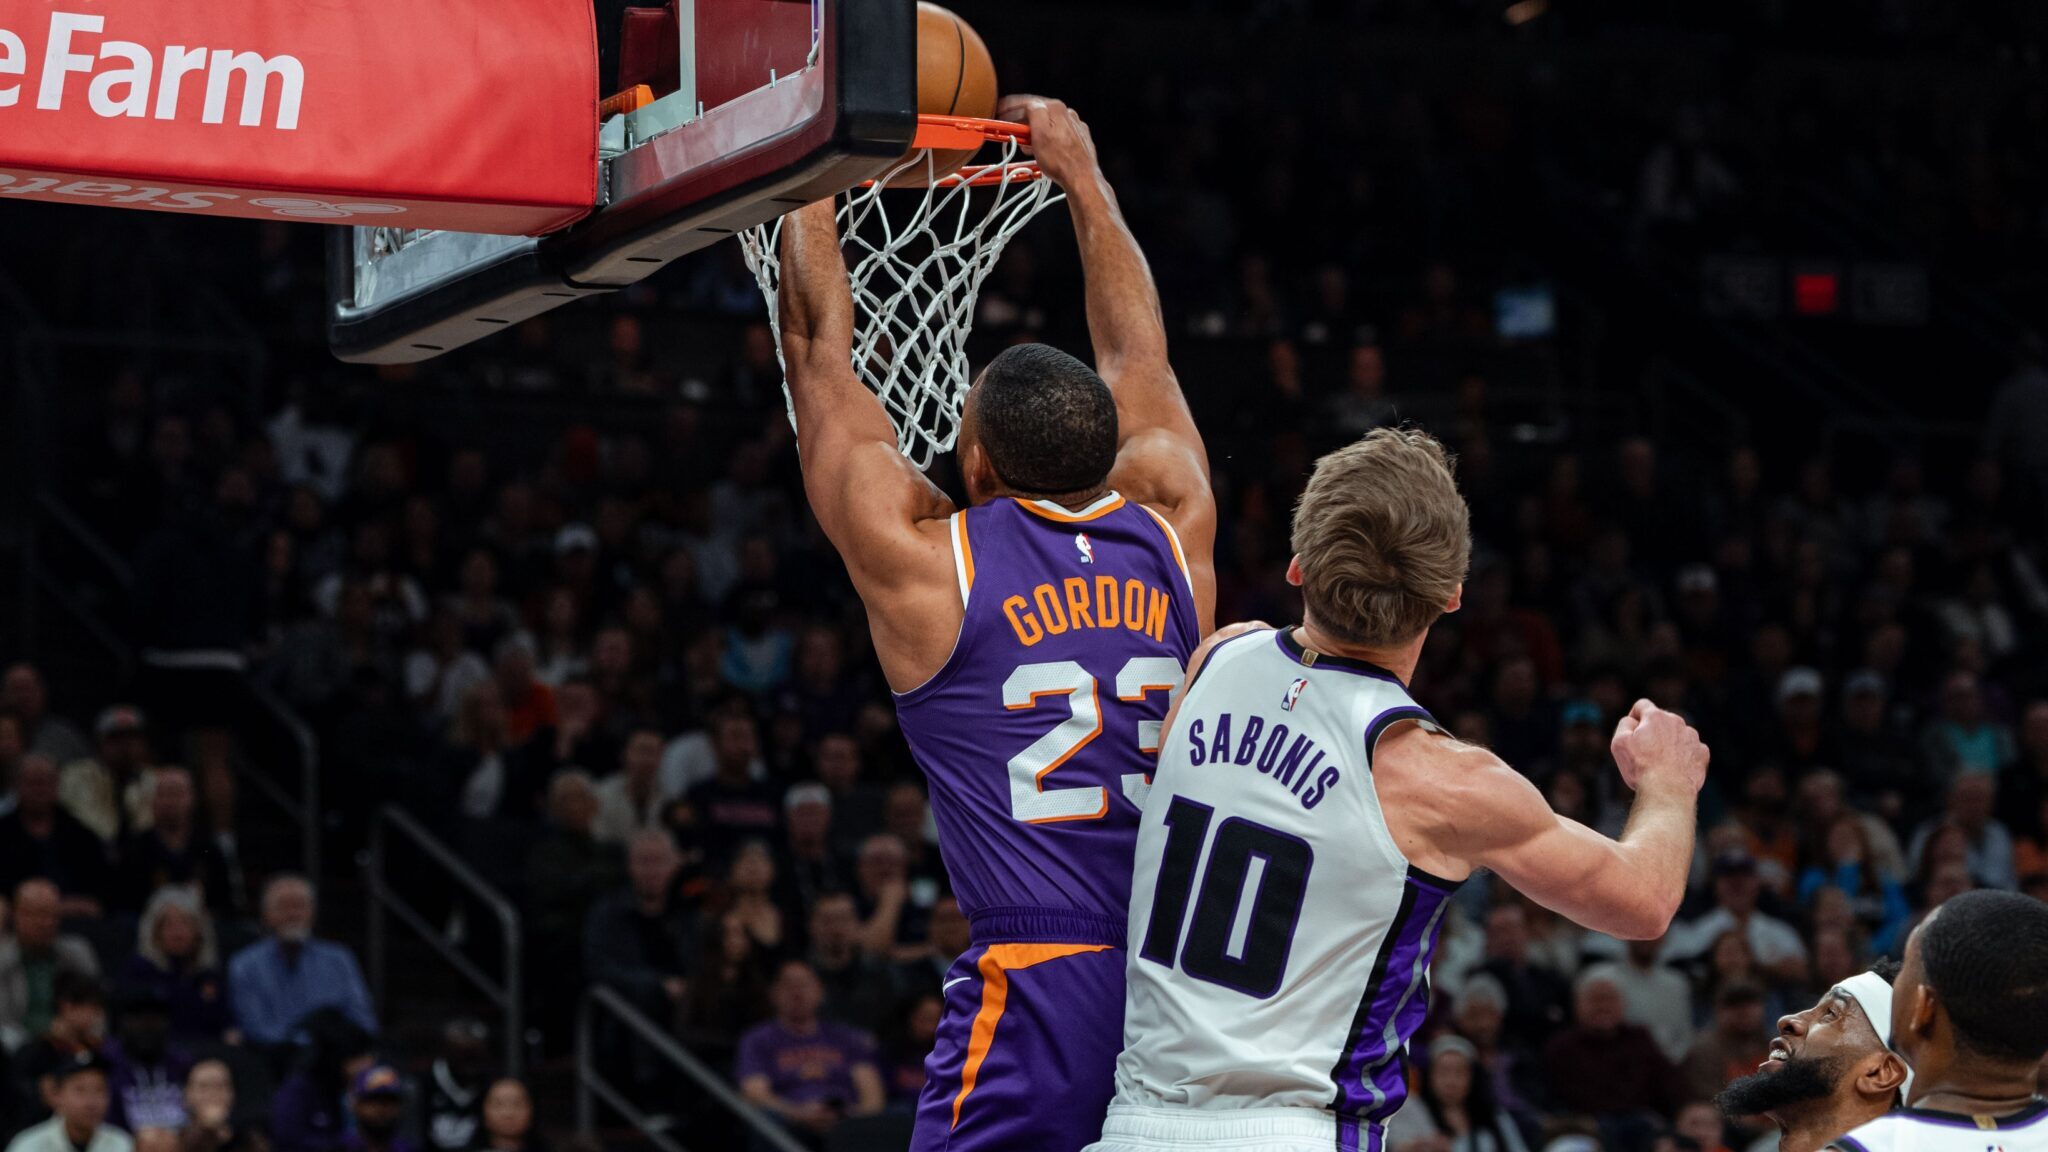 Eric Gordon stuns Suns' bench with alley-oop jam vs. Kings